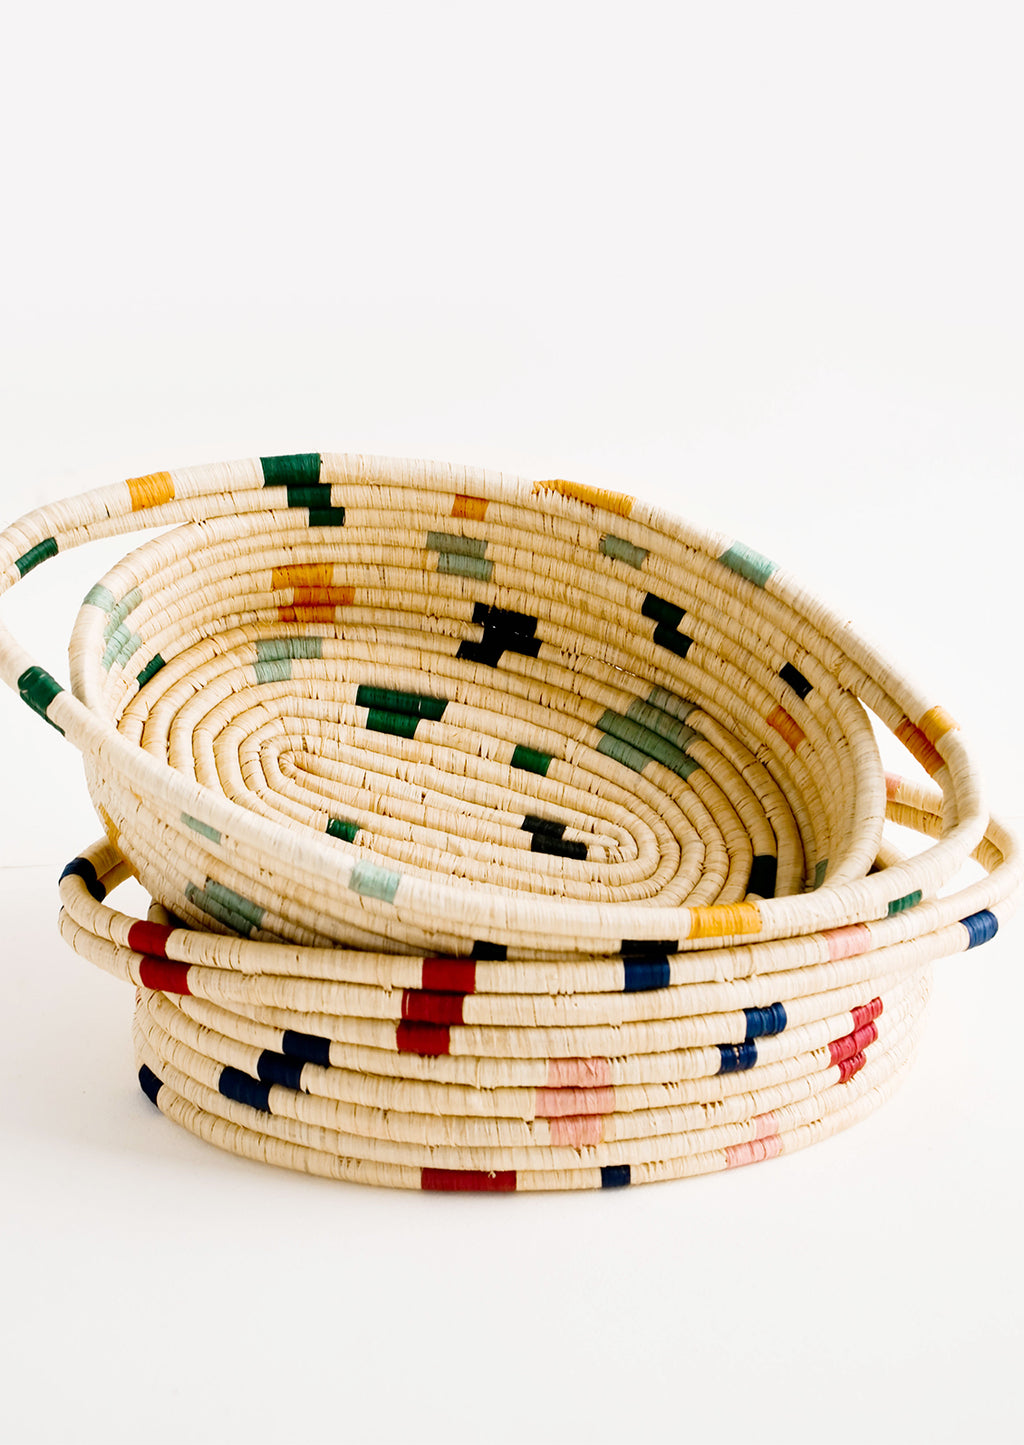 2: Oval shaped, woven raffia baskets with terrazzo inspired print